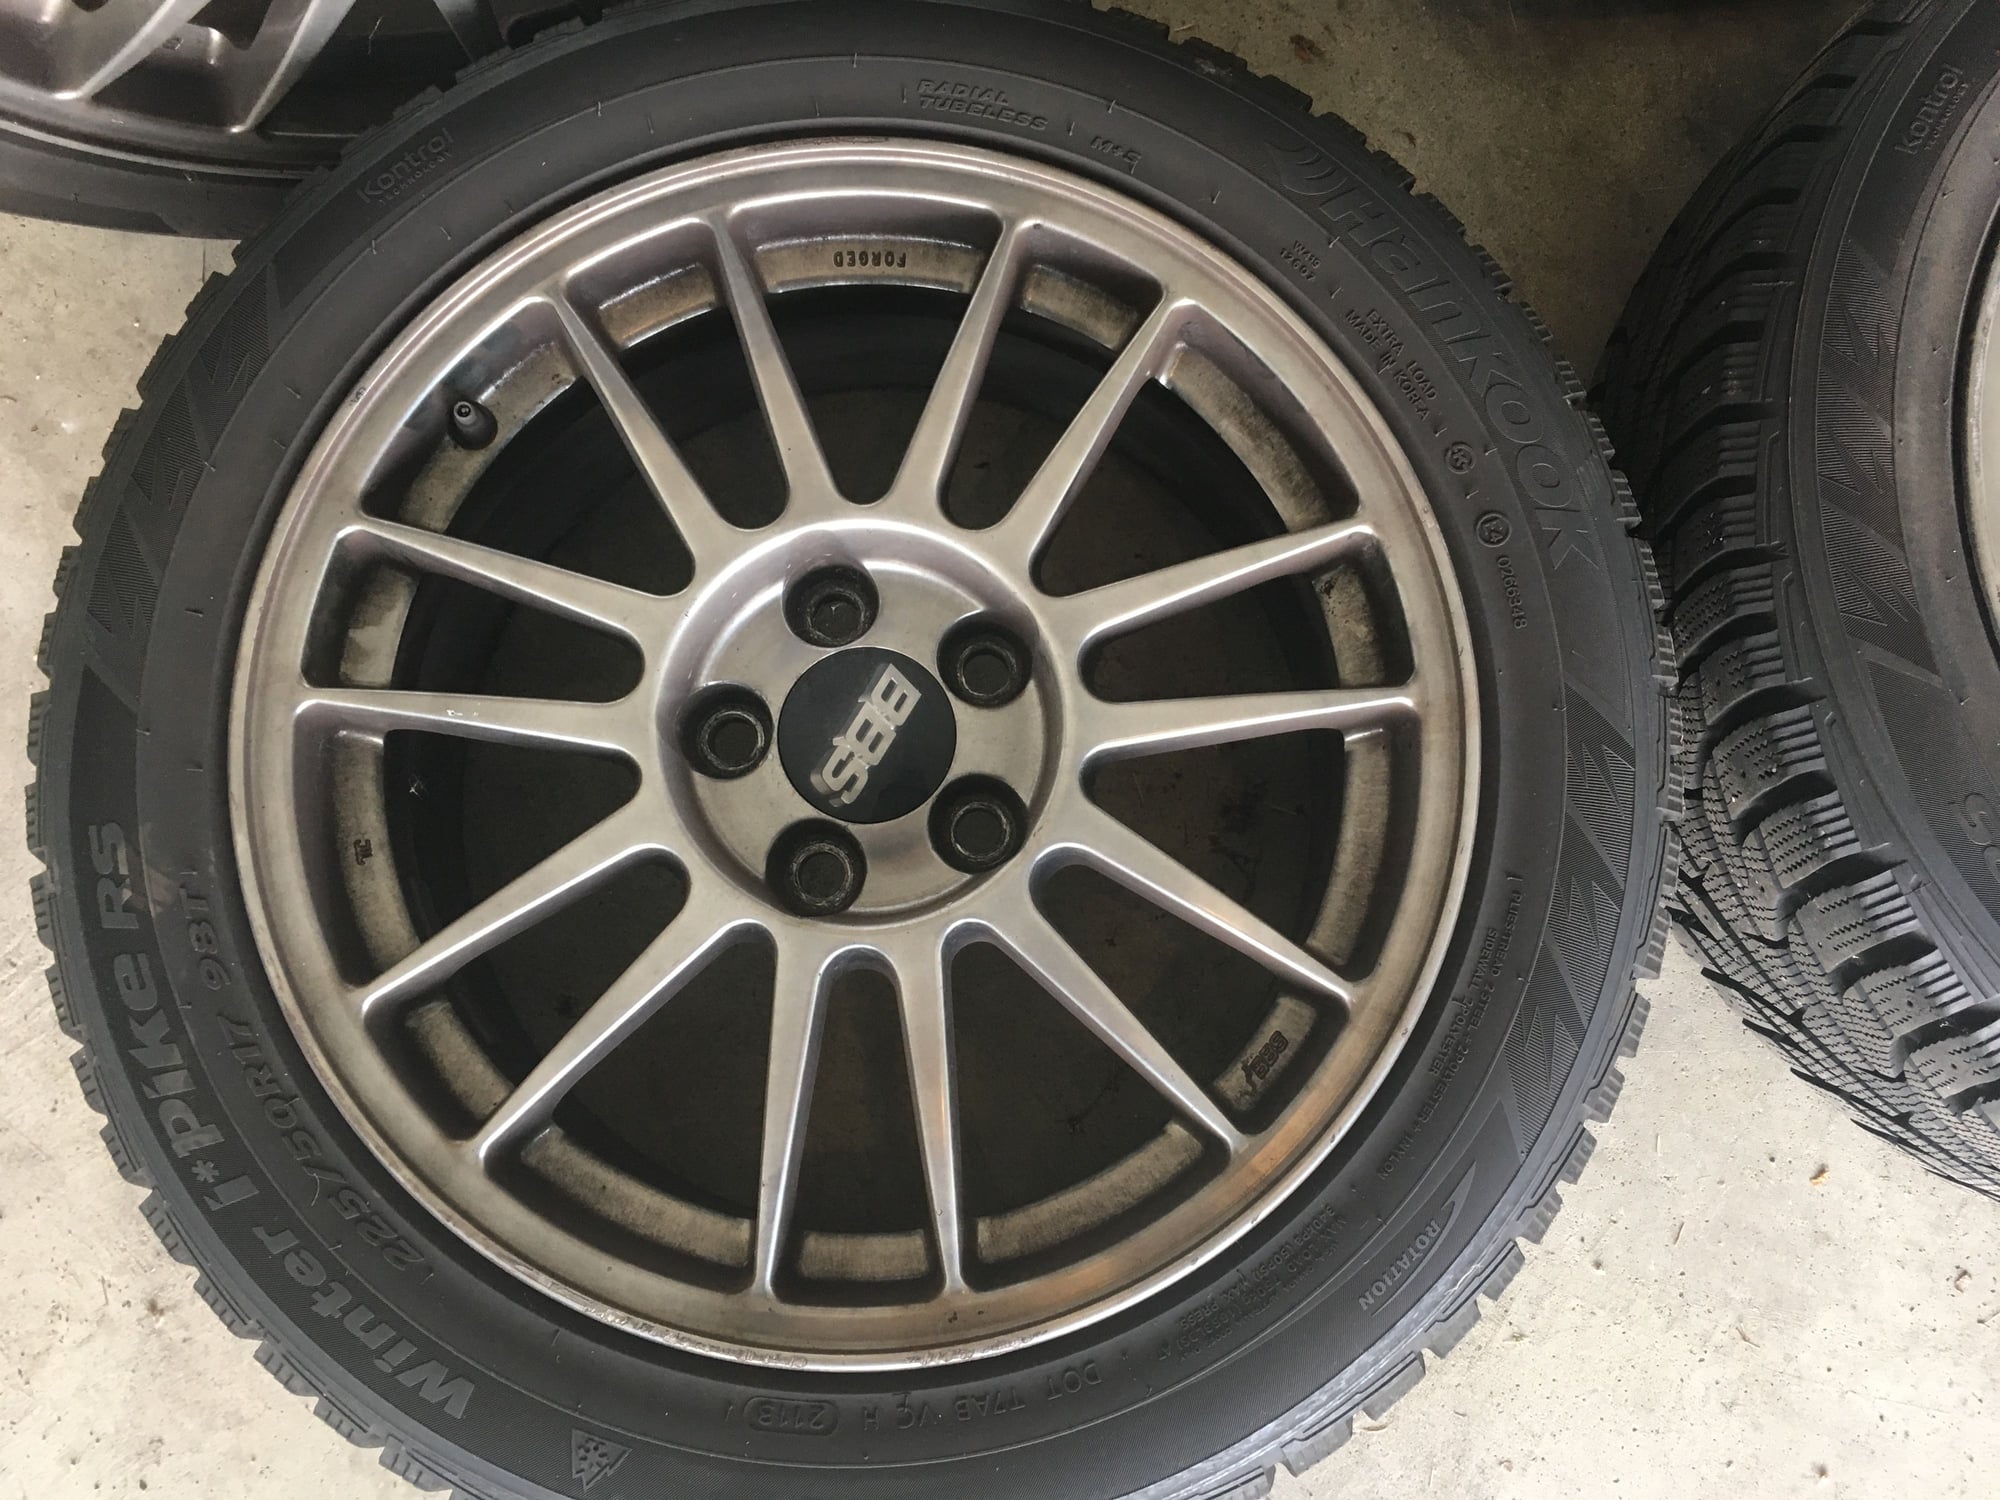 Wheels and Tires/Axles - Evo 9 SE BBS wheels with Hankook Snow tires - Used - All Years Any Make All Models - West Lafayette, IN 47906, United States